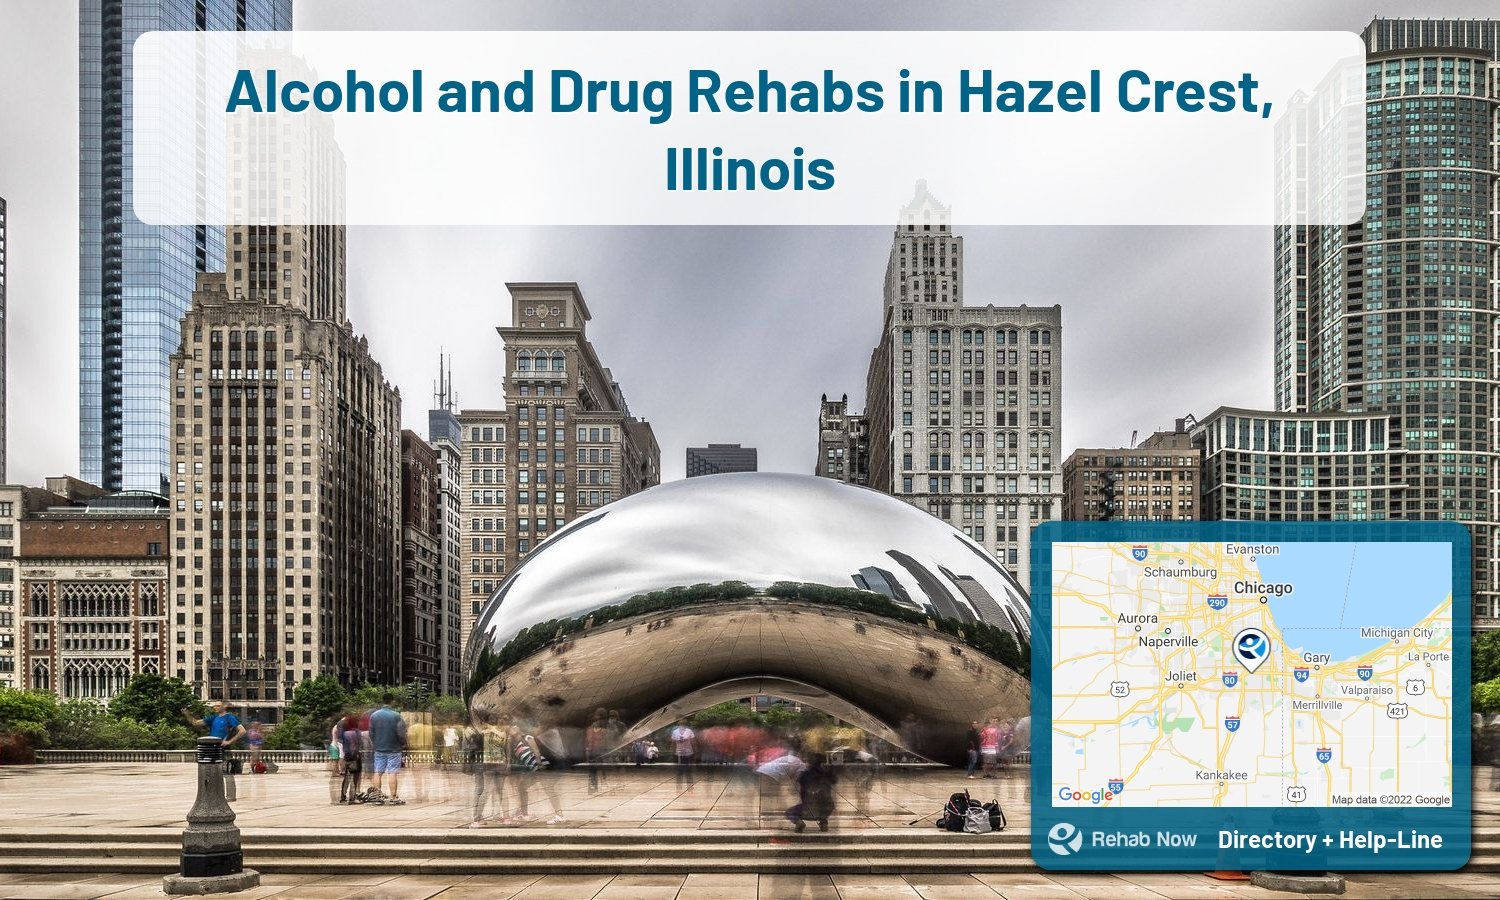 Easily find the top Rehab Centers in Hazel Crest, IL. We researched hard to pick the best alcohol and drug rehab centers in Illinois.